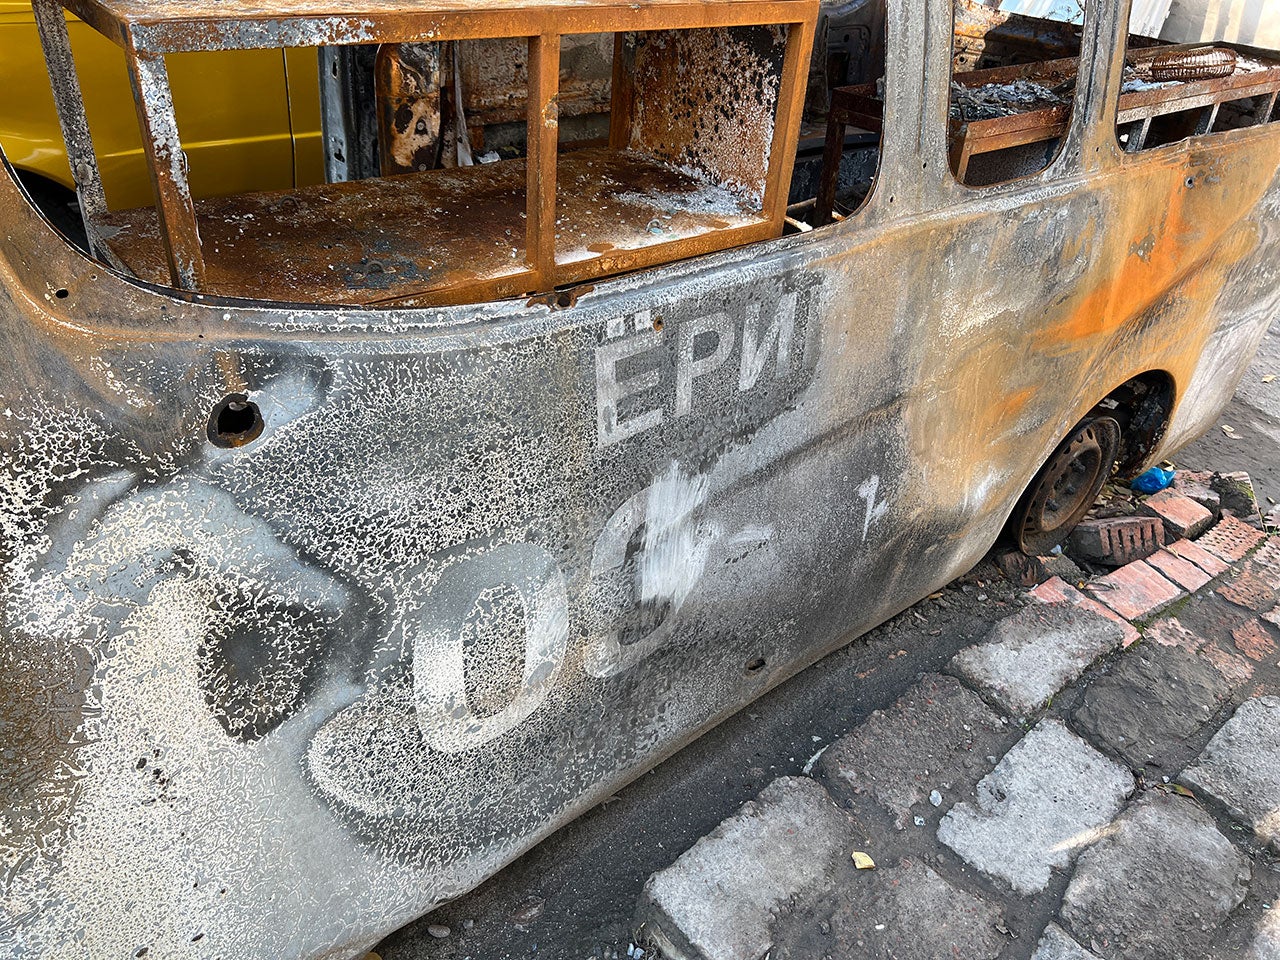 Markings stating “Ambulance” on the wreckage of a Tajik ambulance from Chorkuh Village Hospital, which was attacked near a bridge by the border in Chorbog on September 16, 2022, along with another ambulance and a car carrying civilians.